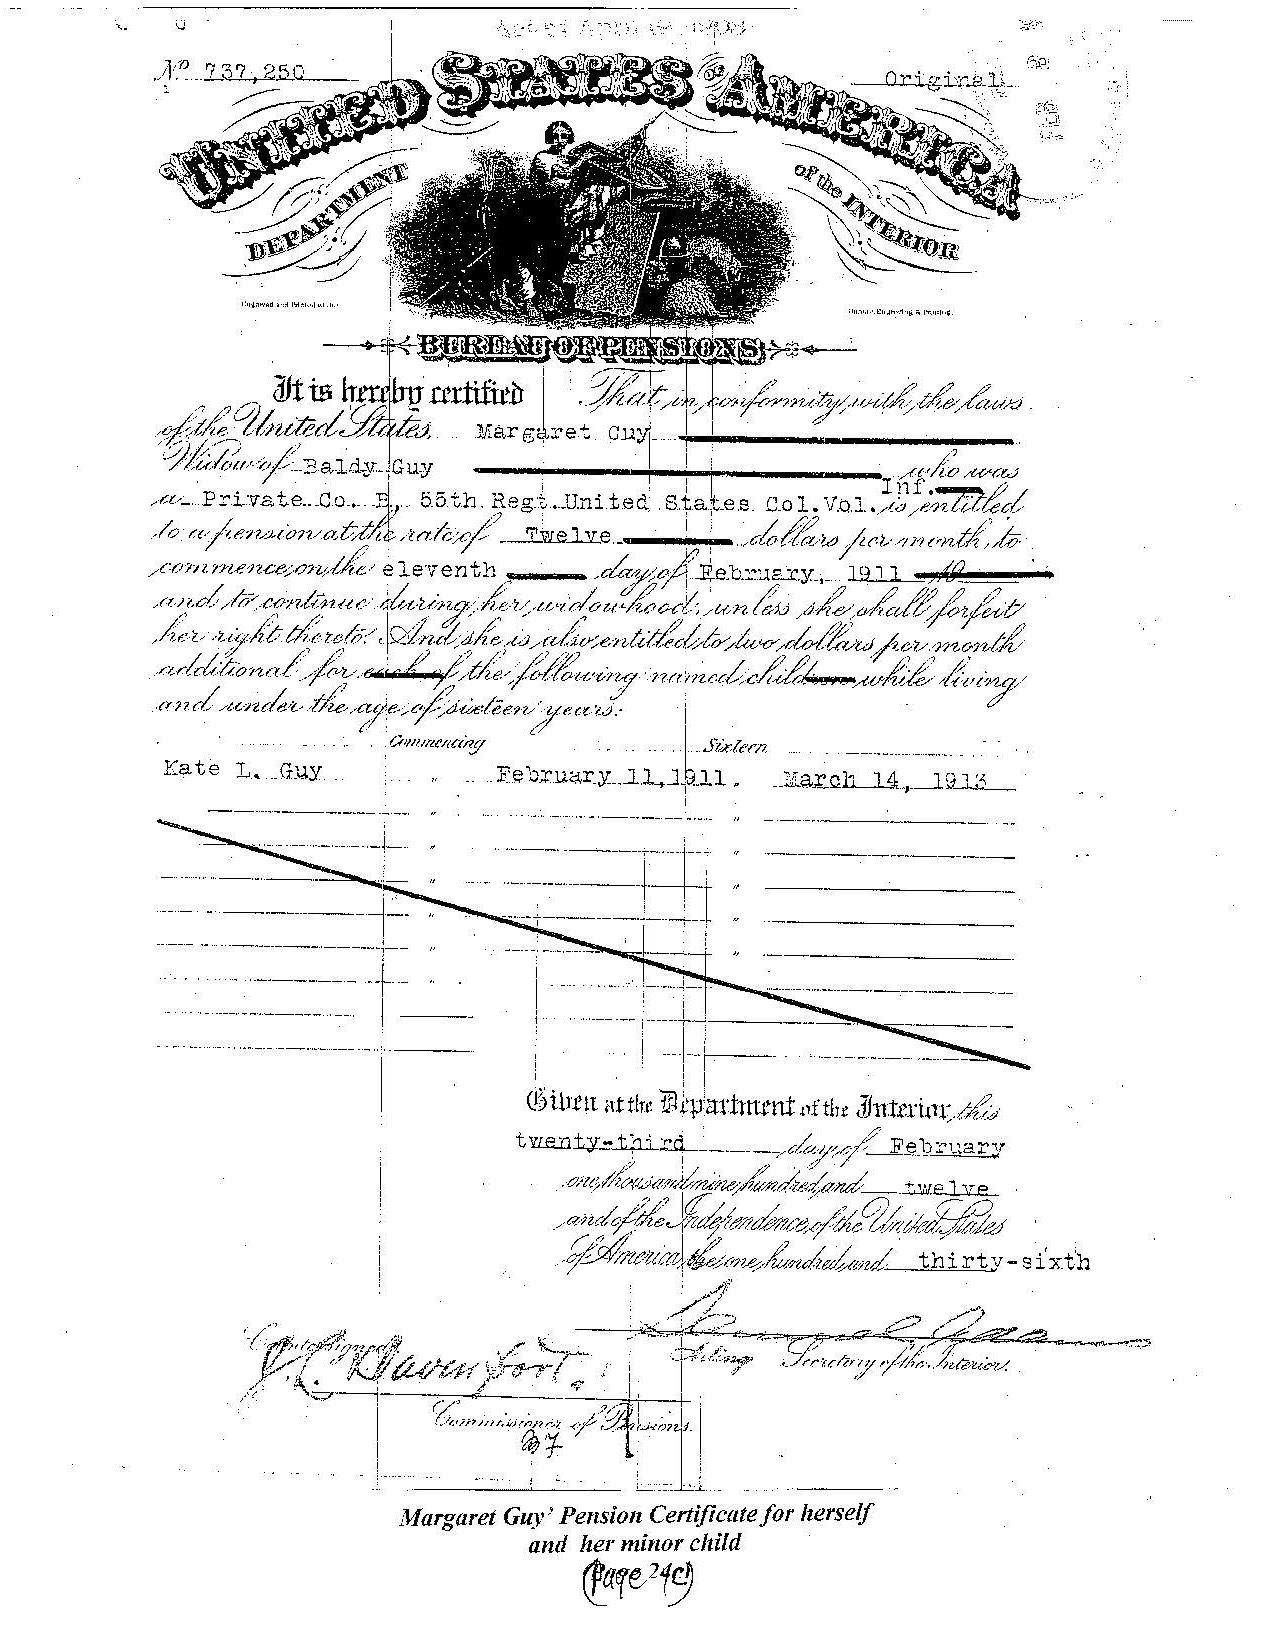 Margaret Norton-Guy's Pension Certificate for herself and her minor child Kate Lou Guy